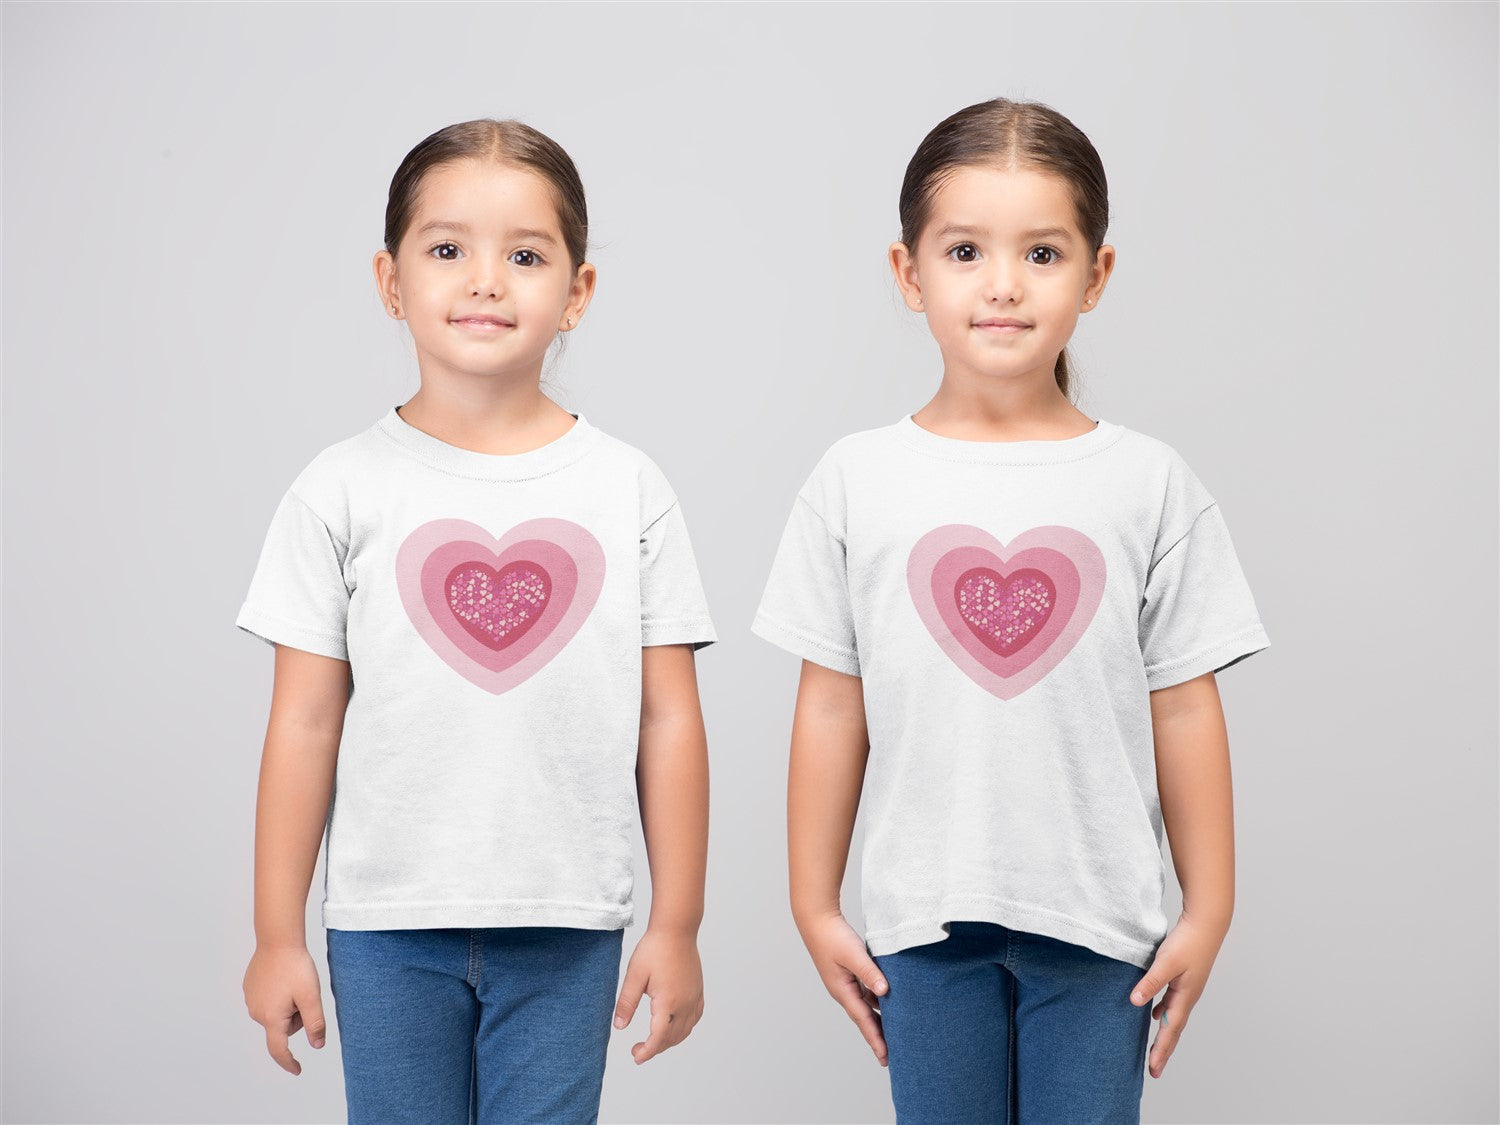 Celebrate love with our t-shirt collections for toddlers and kids at Tees For Toddlers And Kids.